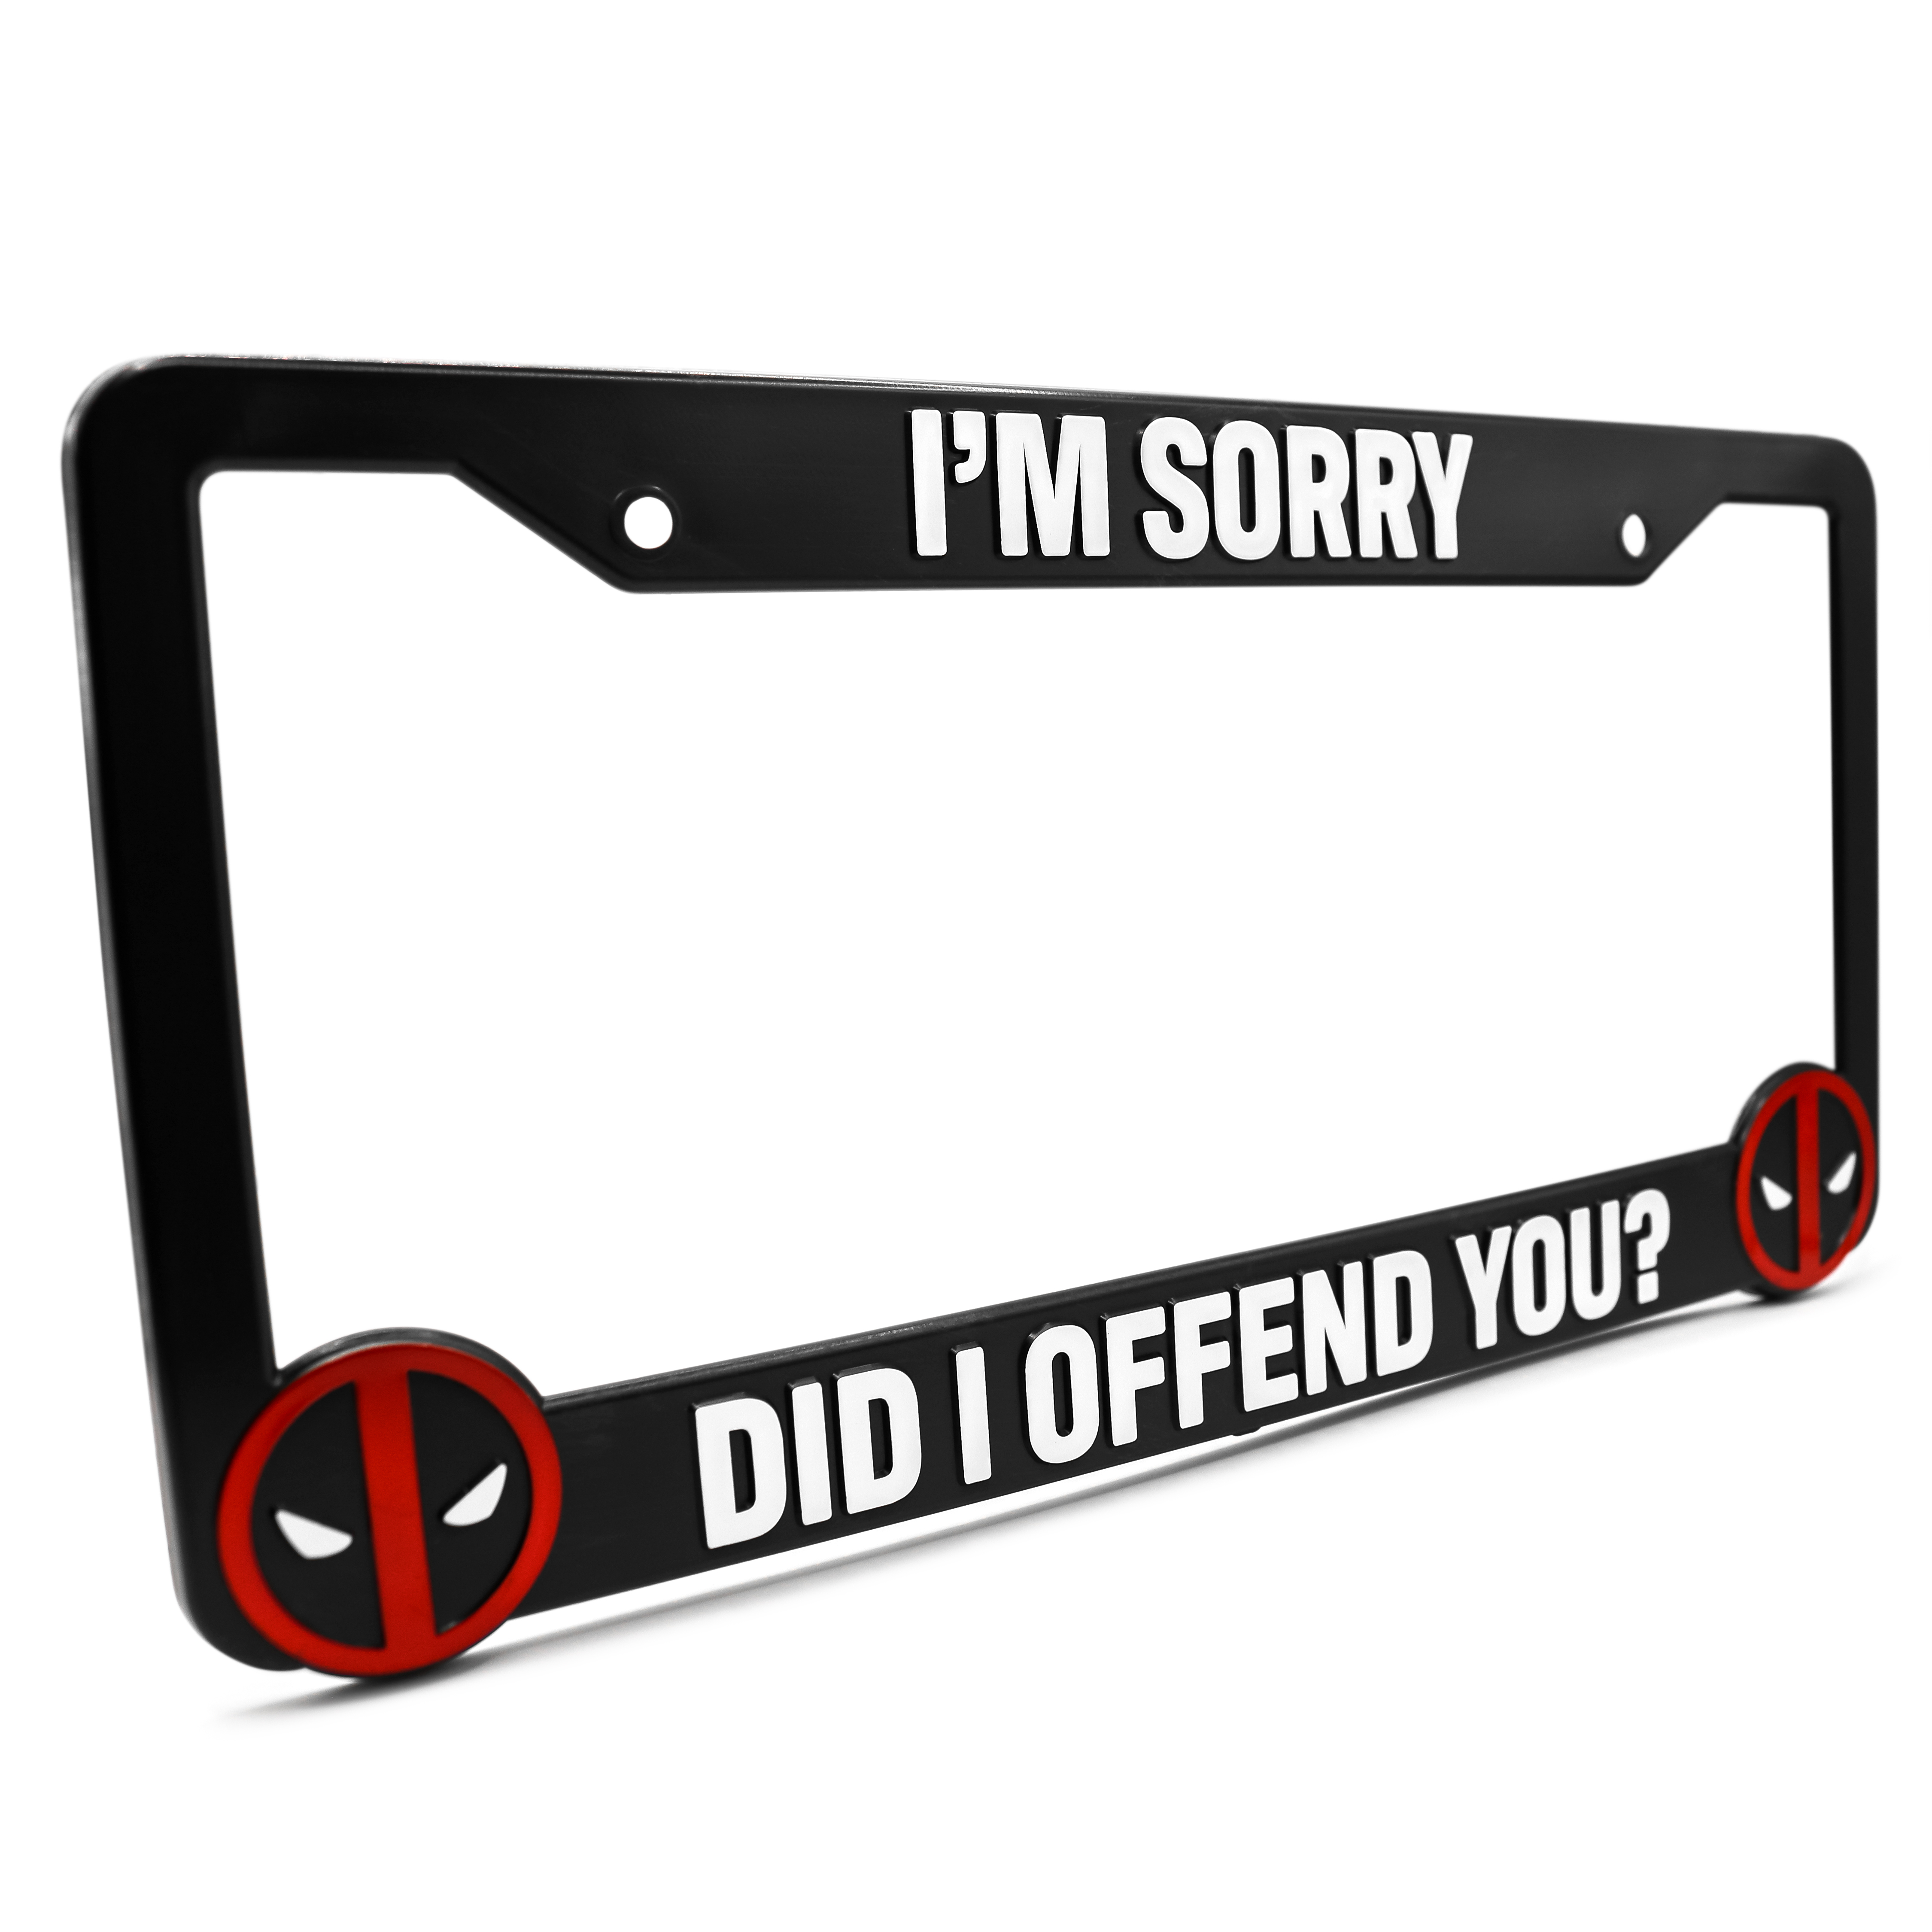 I’m Sorry Did I Offend You? for Deadpool License Plate Frame